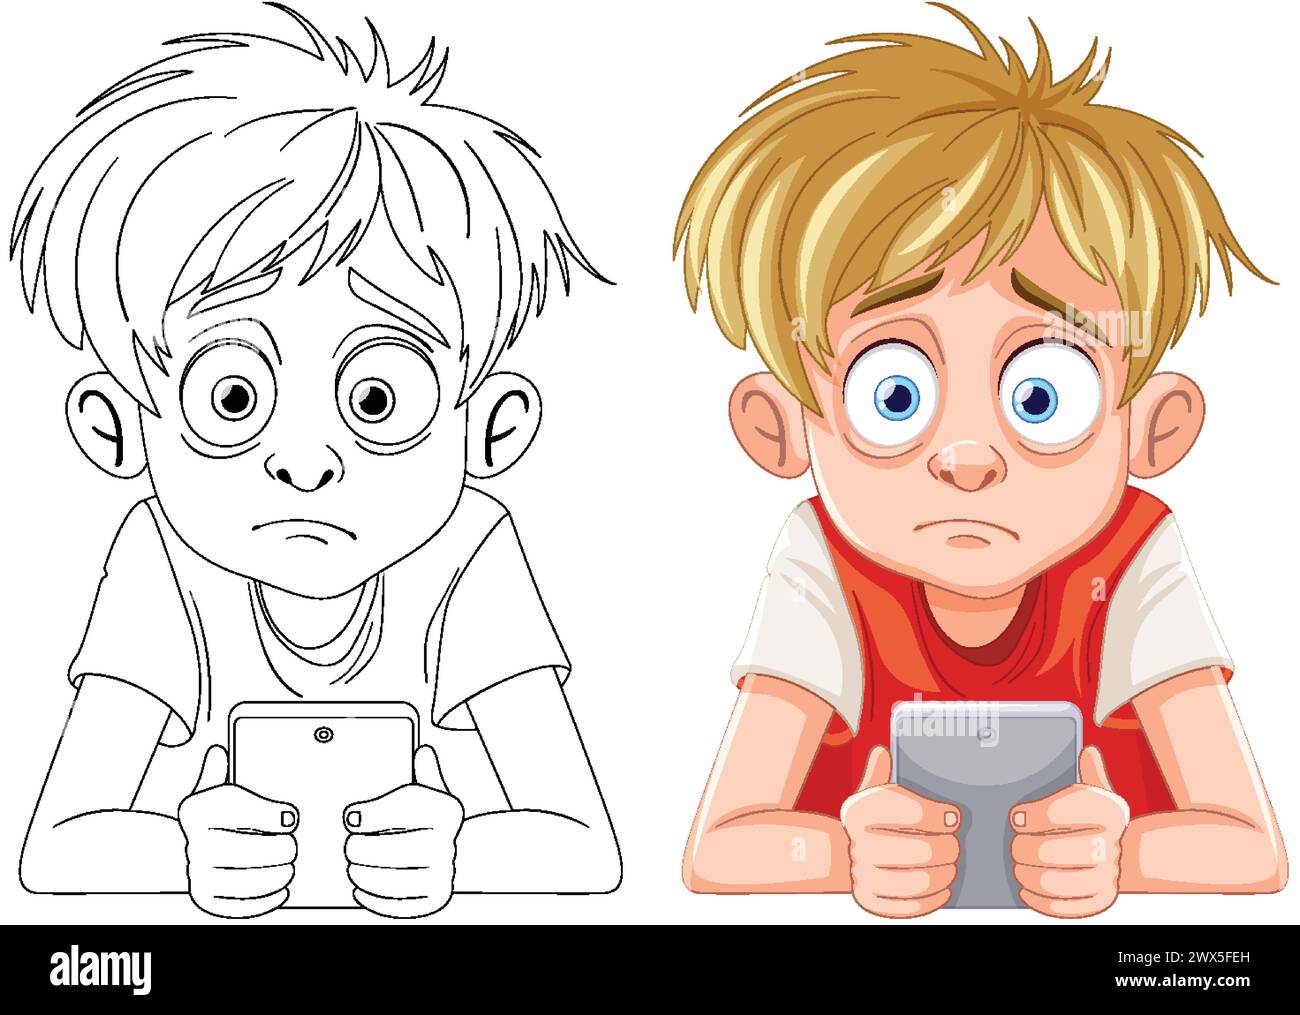 Cartoon boy focused on playing with his mobile device Stock Vector